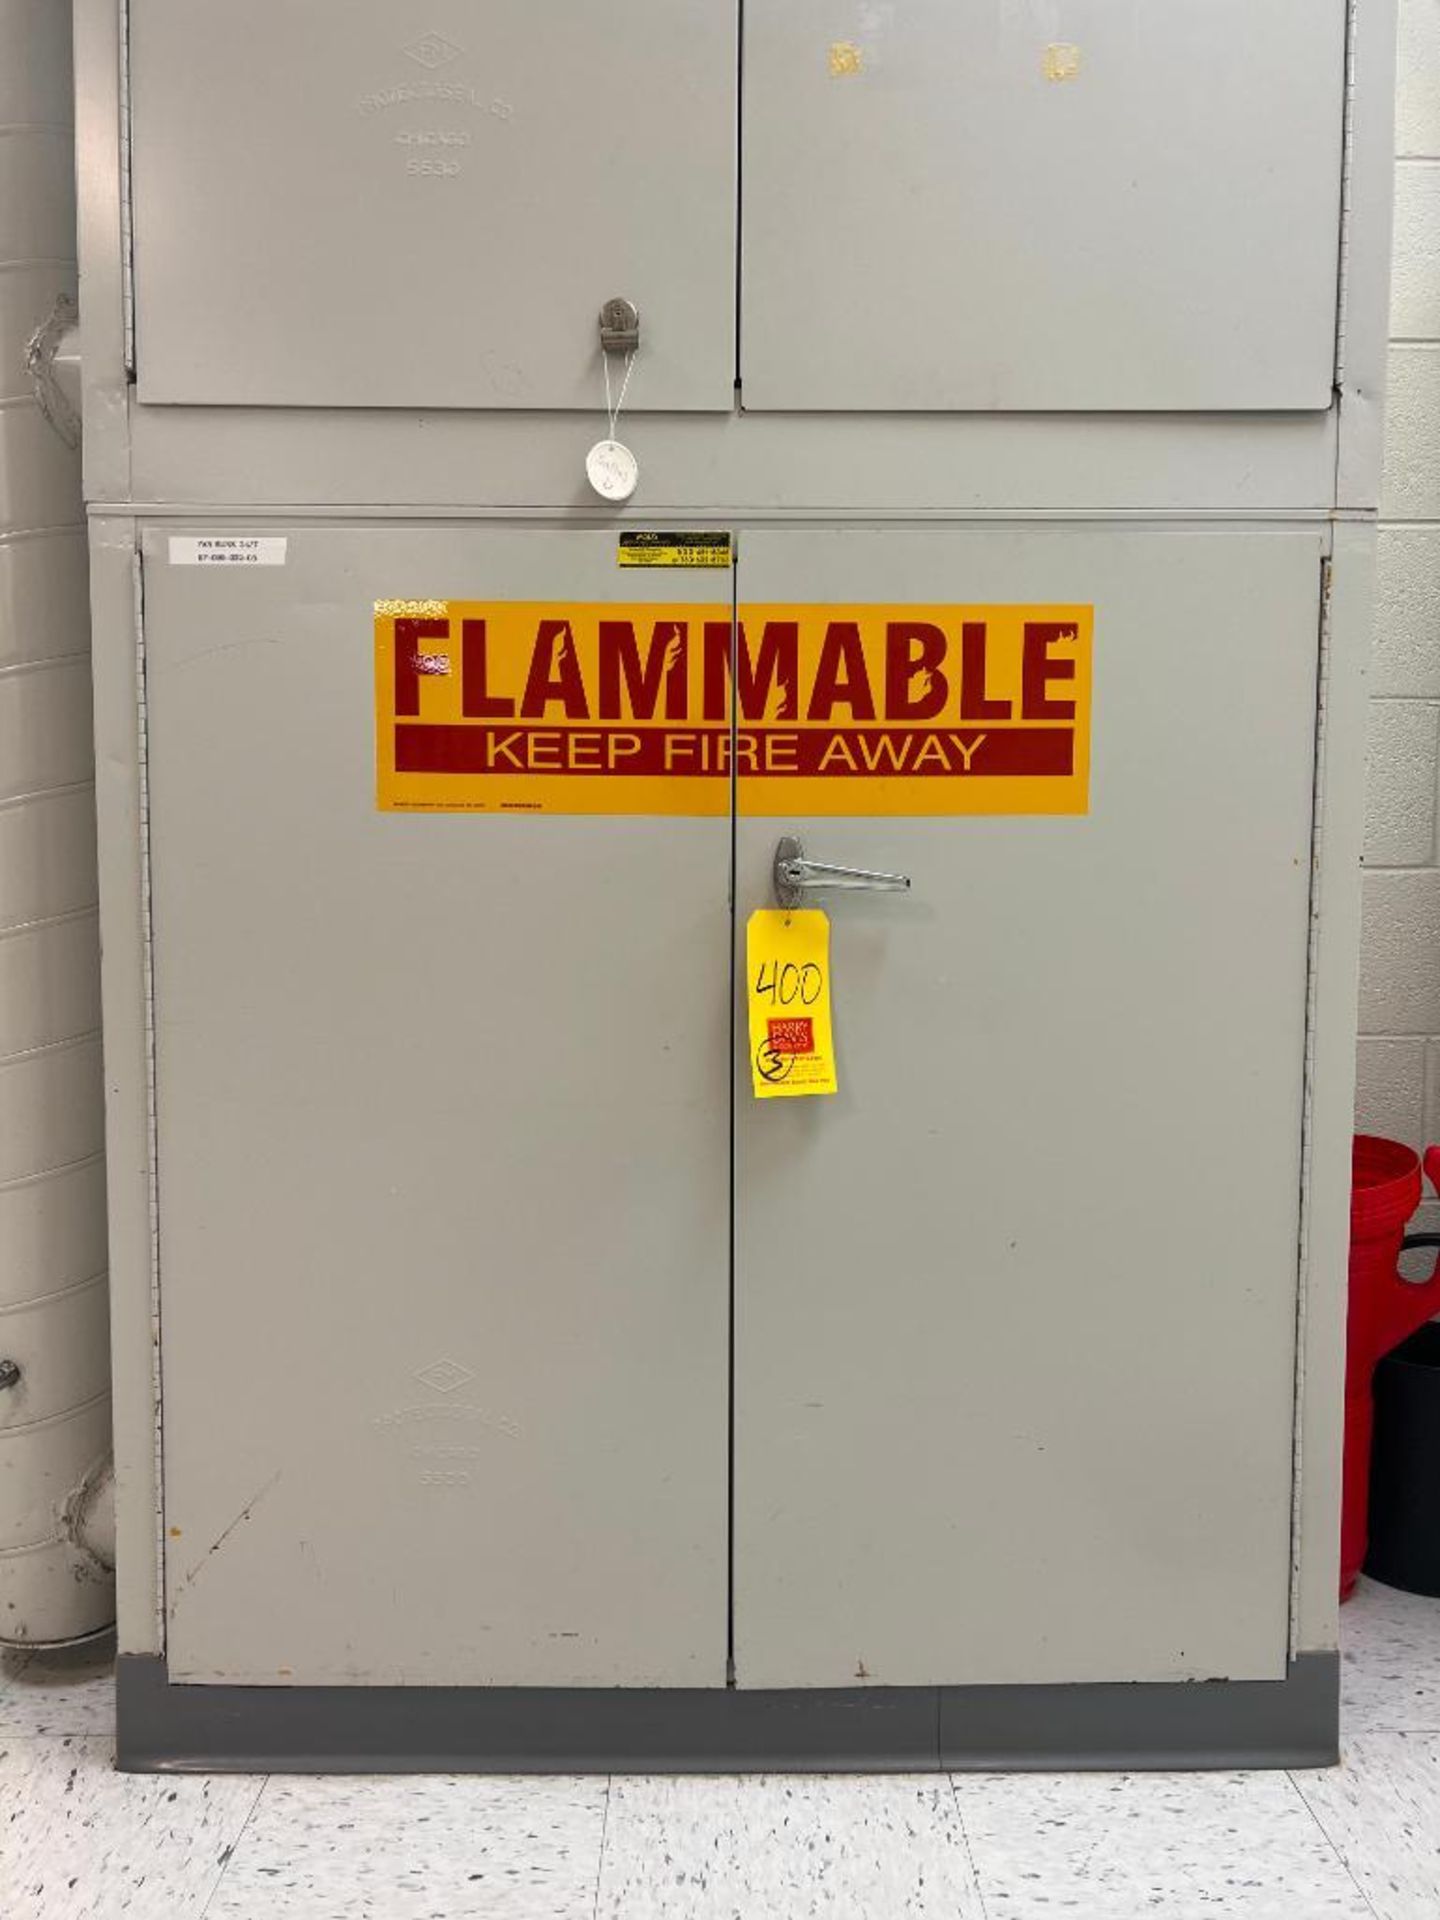 Flammable Material Cabinets - Rigging Fee: $300